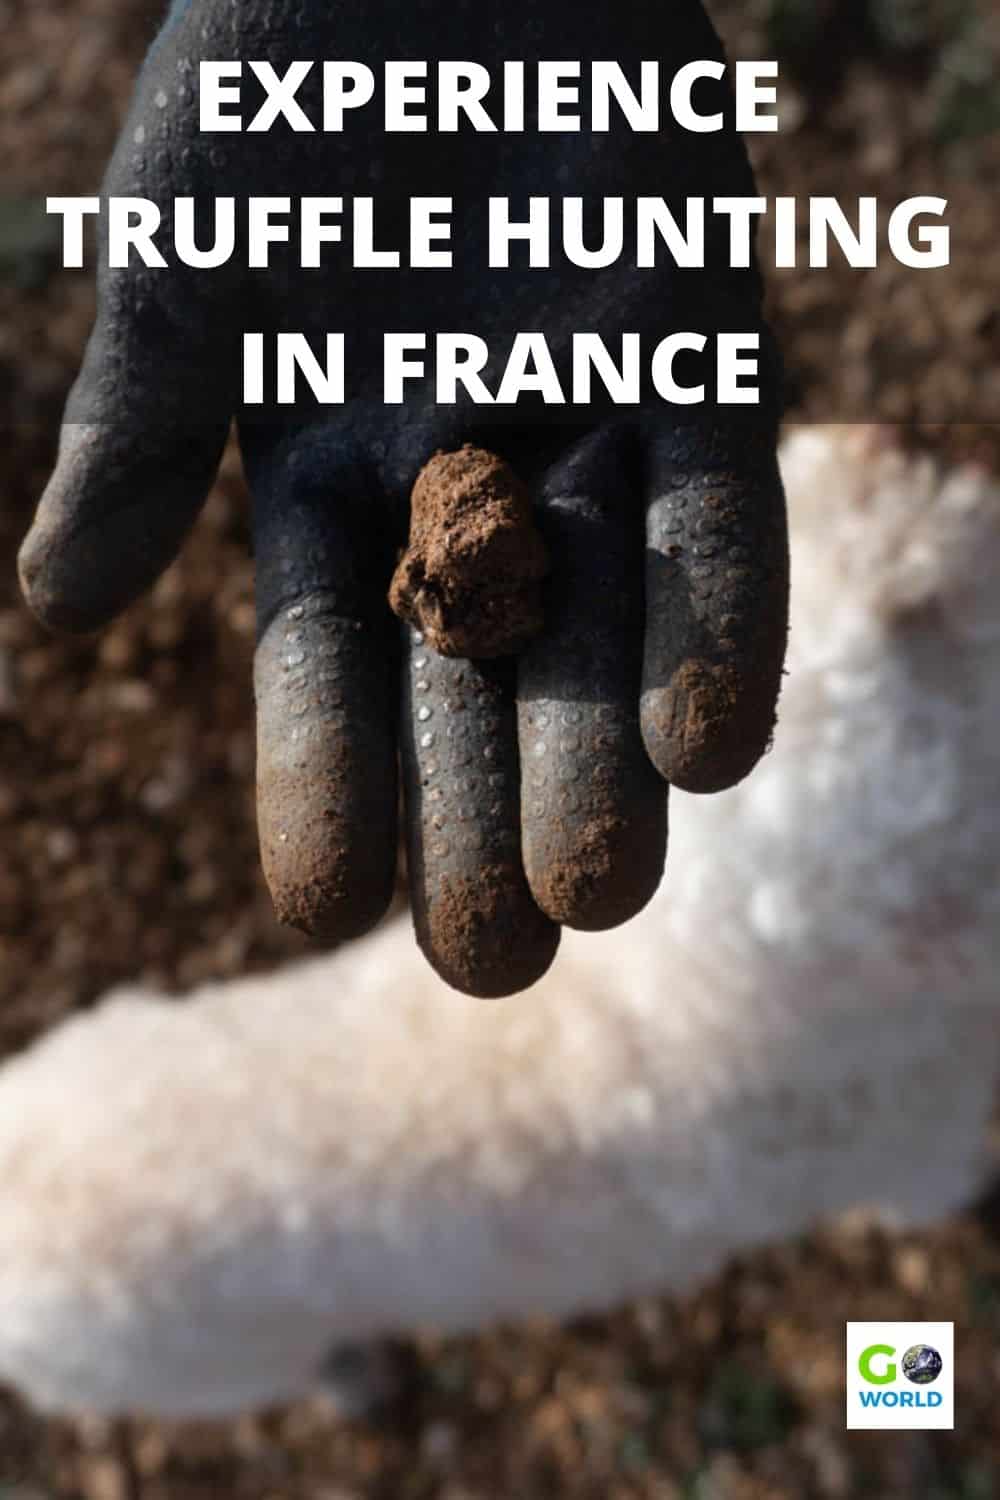 Truffle hunting is a dying art but you can experience it for yourself in Occitanie France. Get a taste of the coveted French black truffle. #Frenchtruffles #trufflehunting #culinarytravel